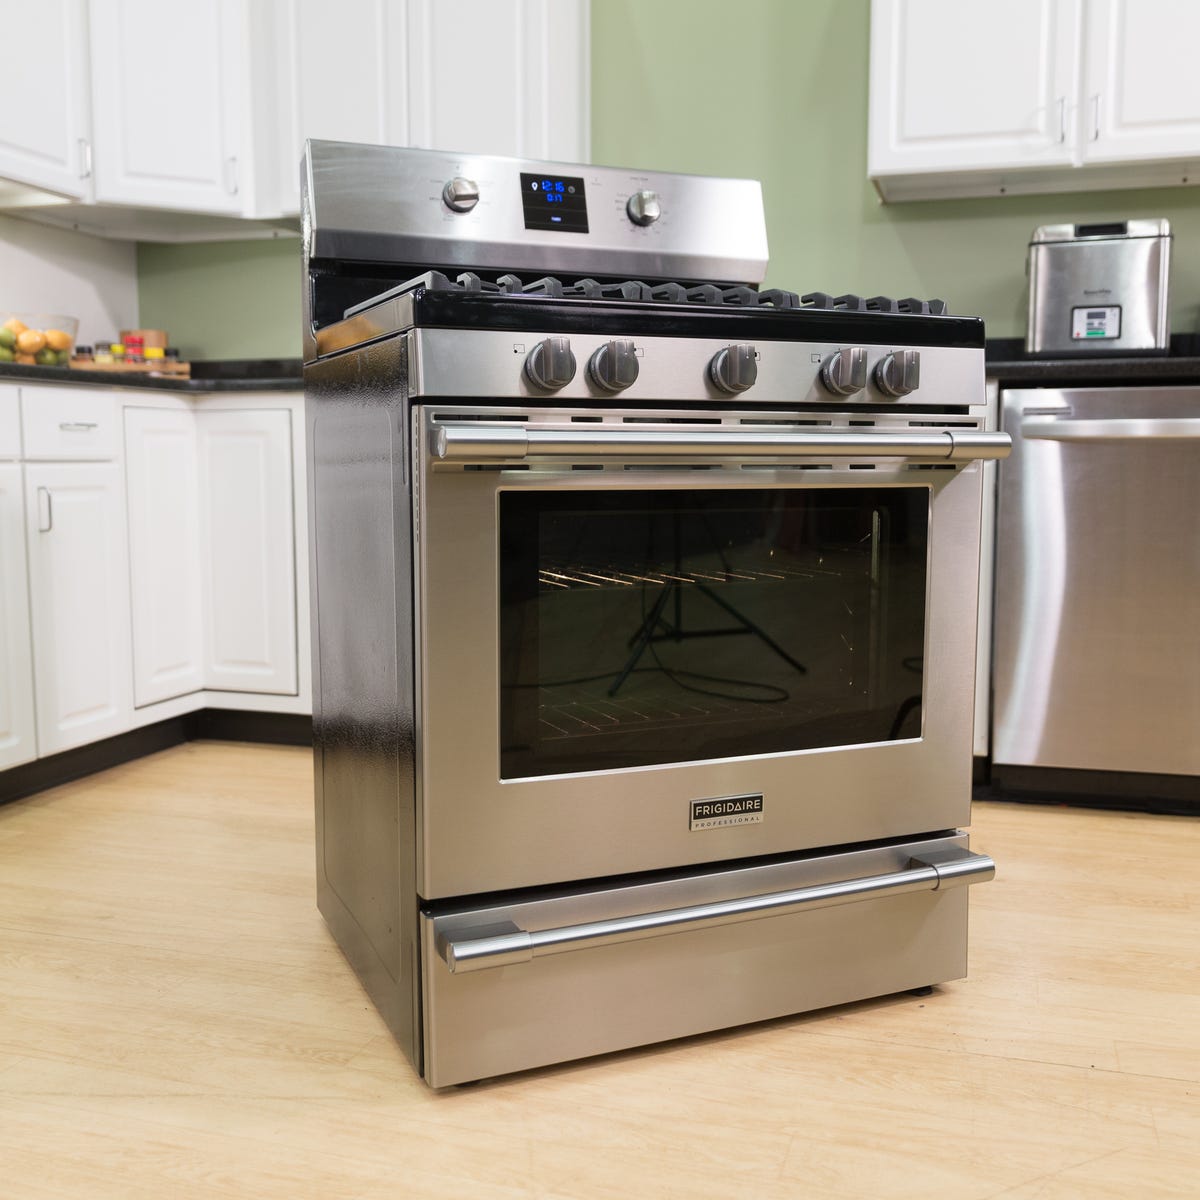 Frigidaire FPGF3077QF range review: Gas cooking power confounded